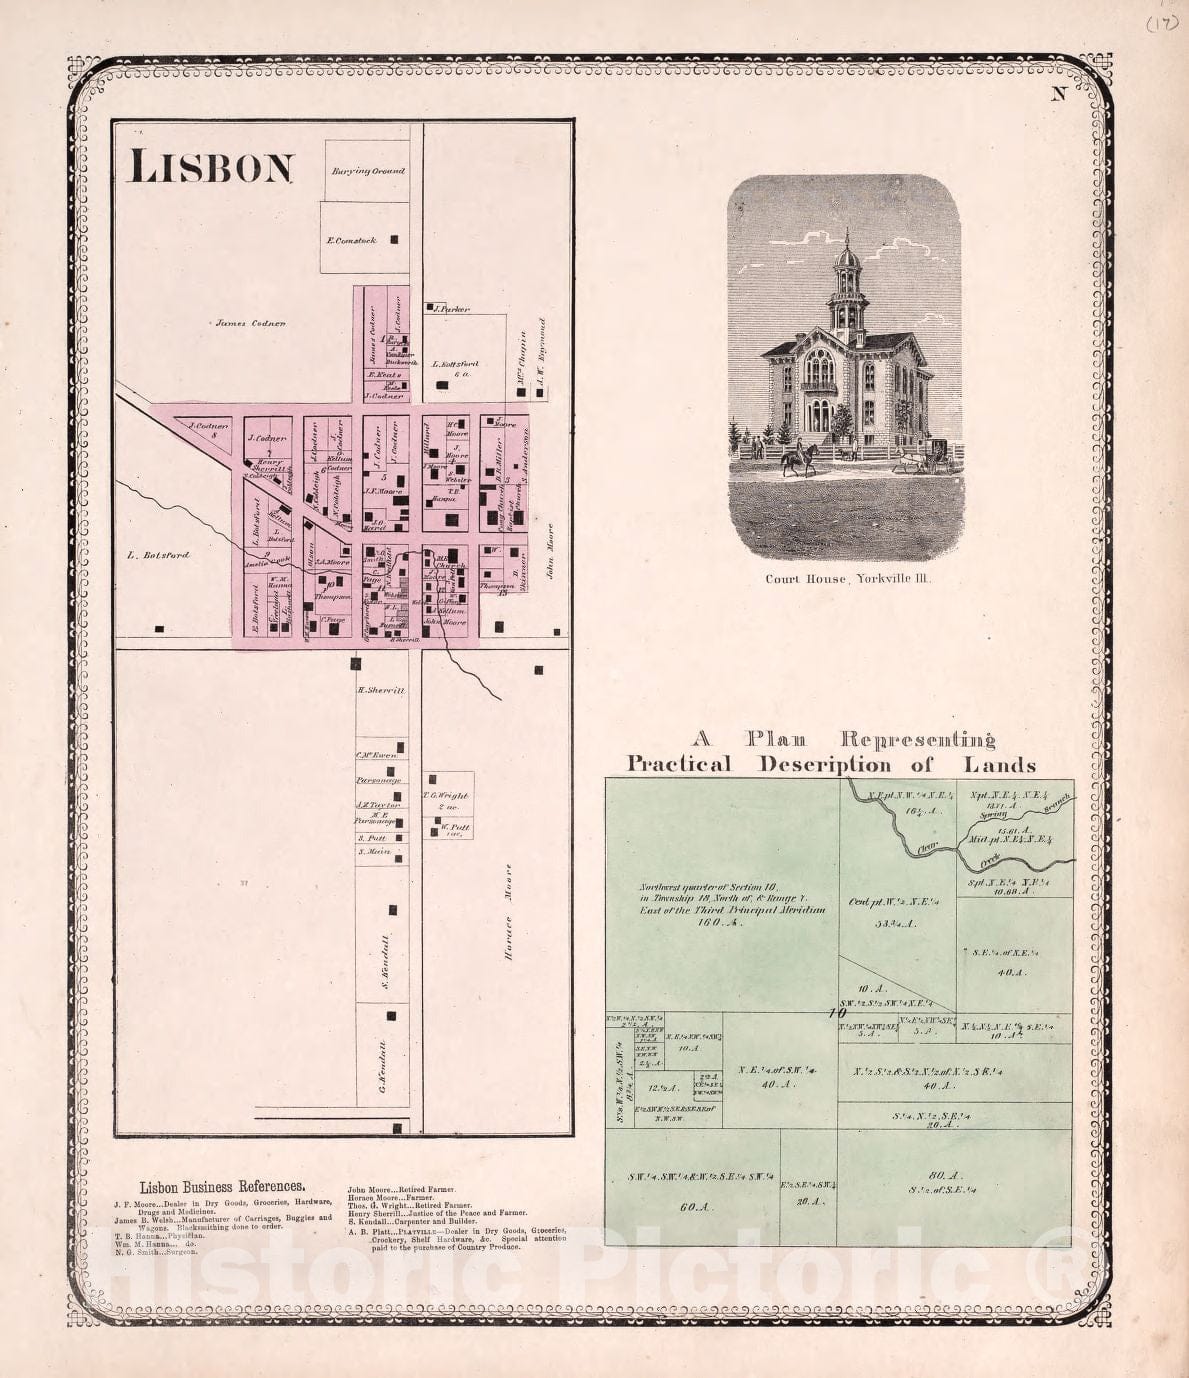 Historic 1870 Map - Atlas of Kendall Co. and The State of Illinois - Lisbon; View of Court House, Yorkville; Practical Description of Lands